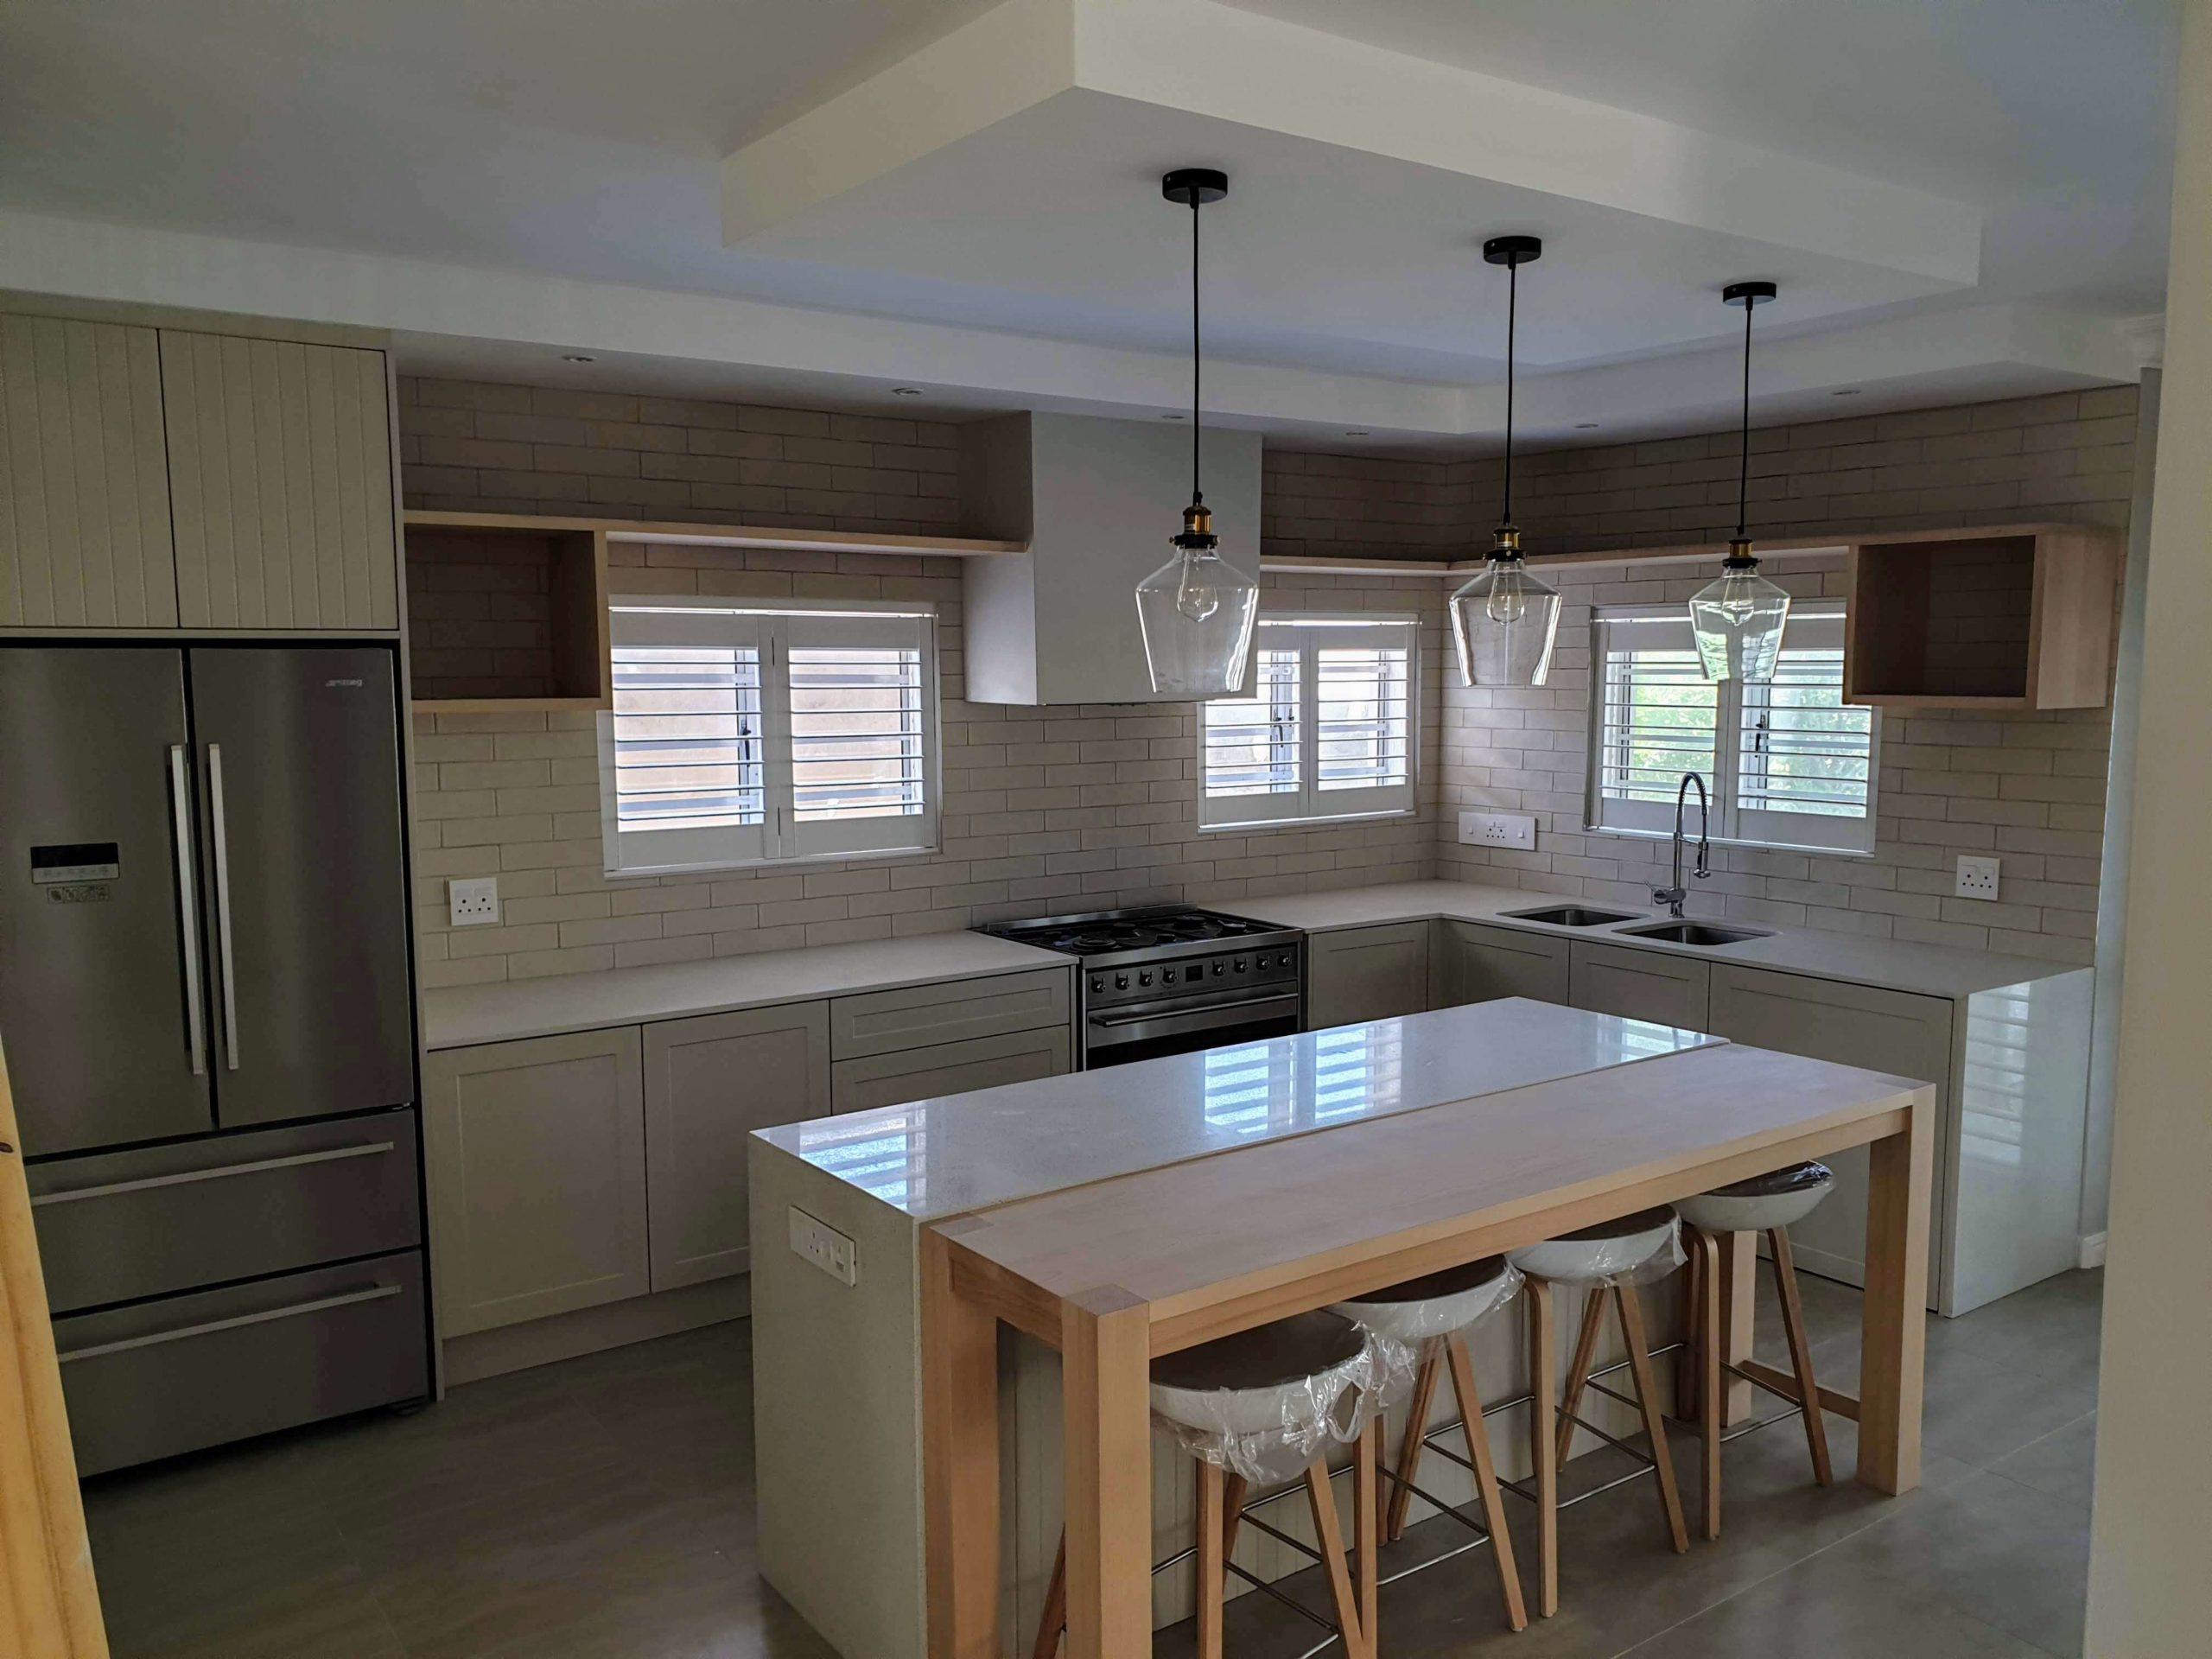 Bespoke Designs - 20190117 111427 scaled - kitchen renovation,cabinetry,custom cabinetry,built in cupboard,Bespoke Designs